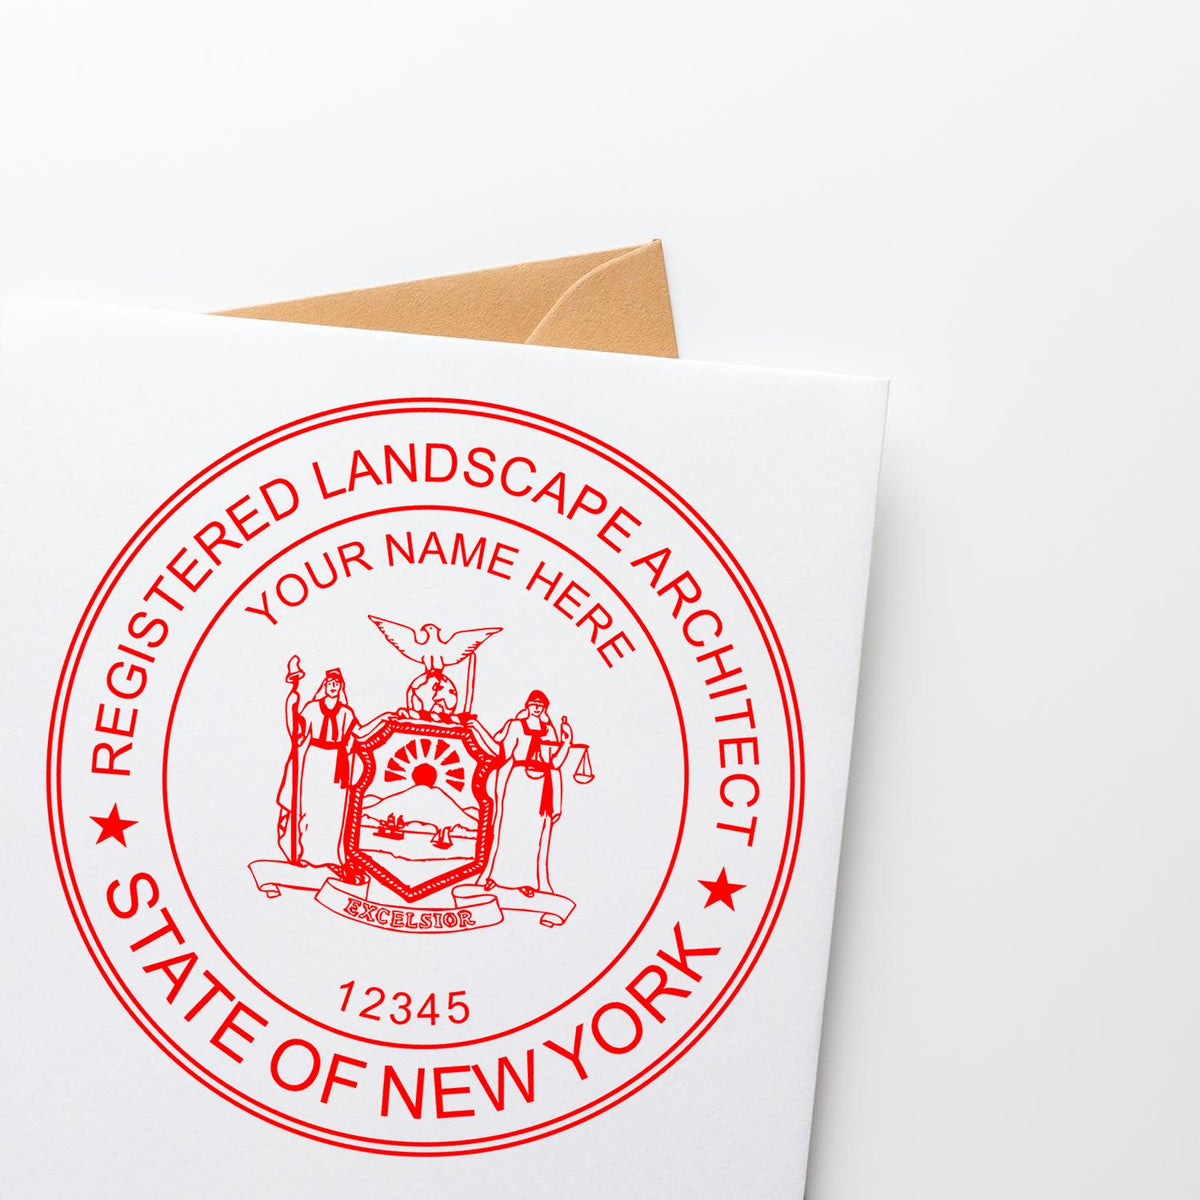 An alternative view of the Premium MaxLight Pre-Inked New York Landscape Architectural Stamp stamped on a sheet of paper showing the image in use